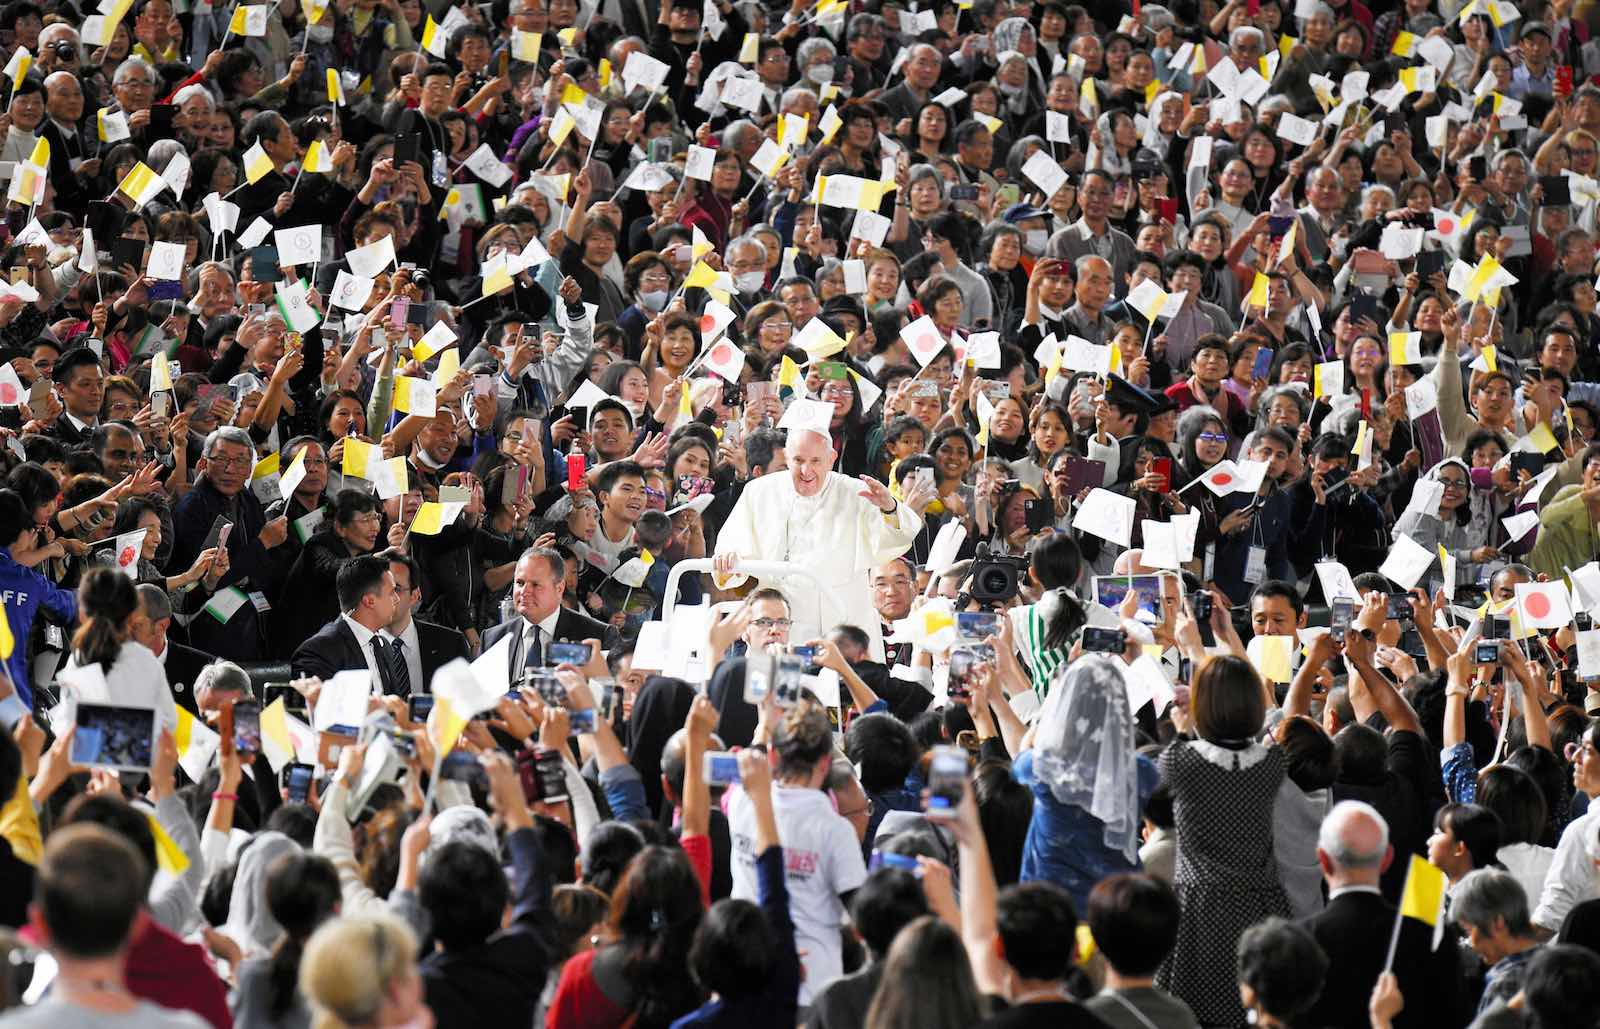 the trail of the Pope in Japan | Lowy Institute